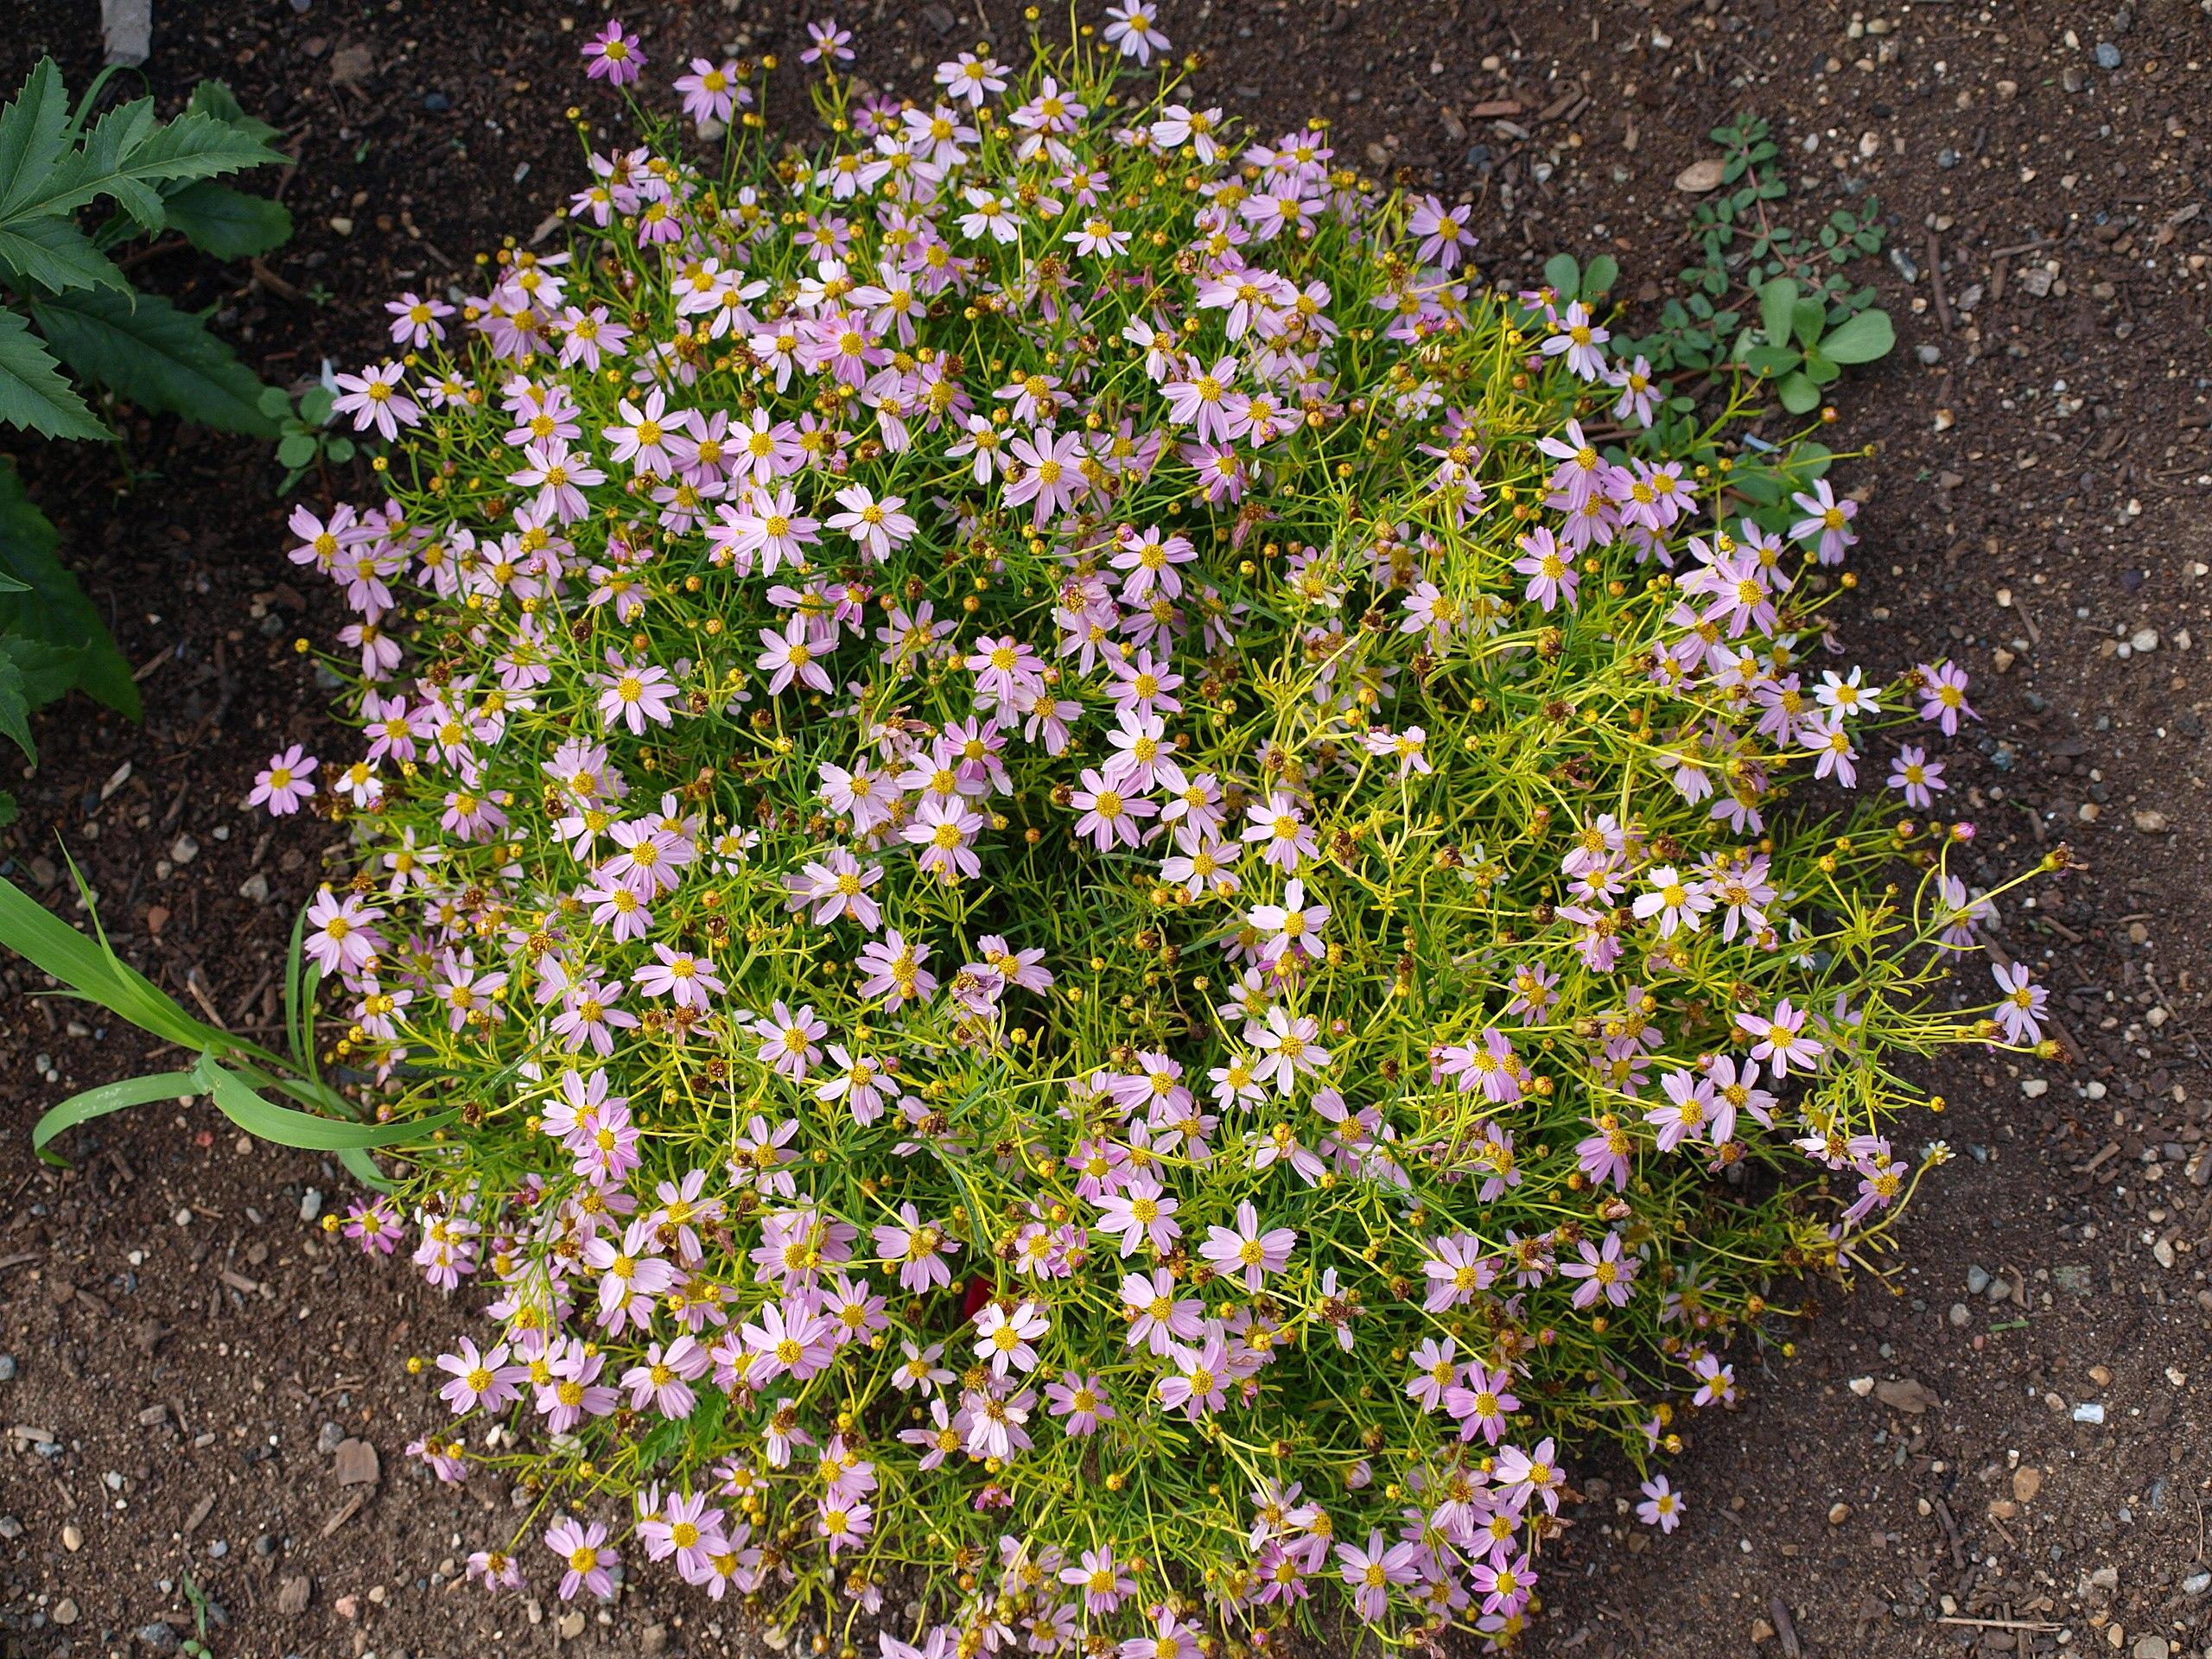 light-purple flowers with yellow center, yellow buds, green leaves and yellow stems